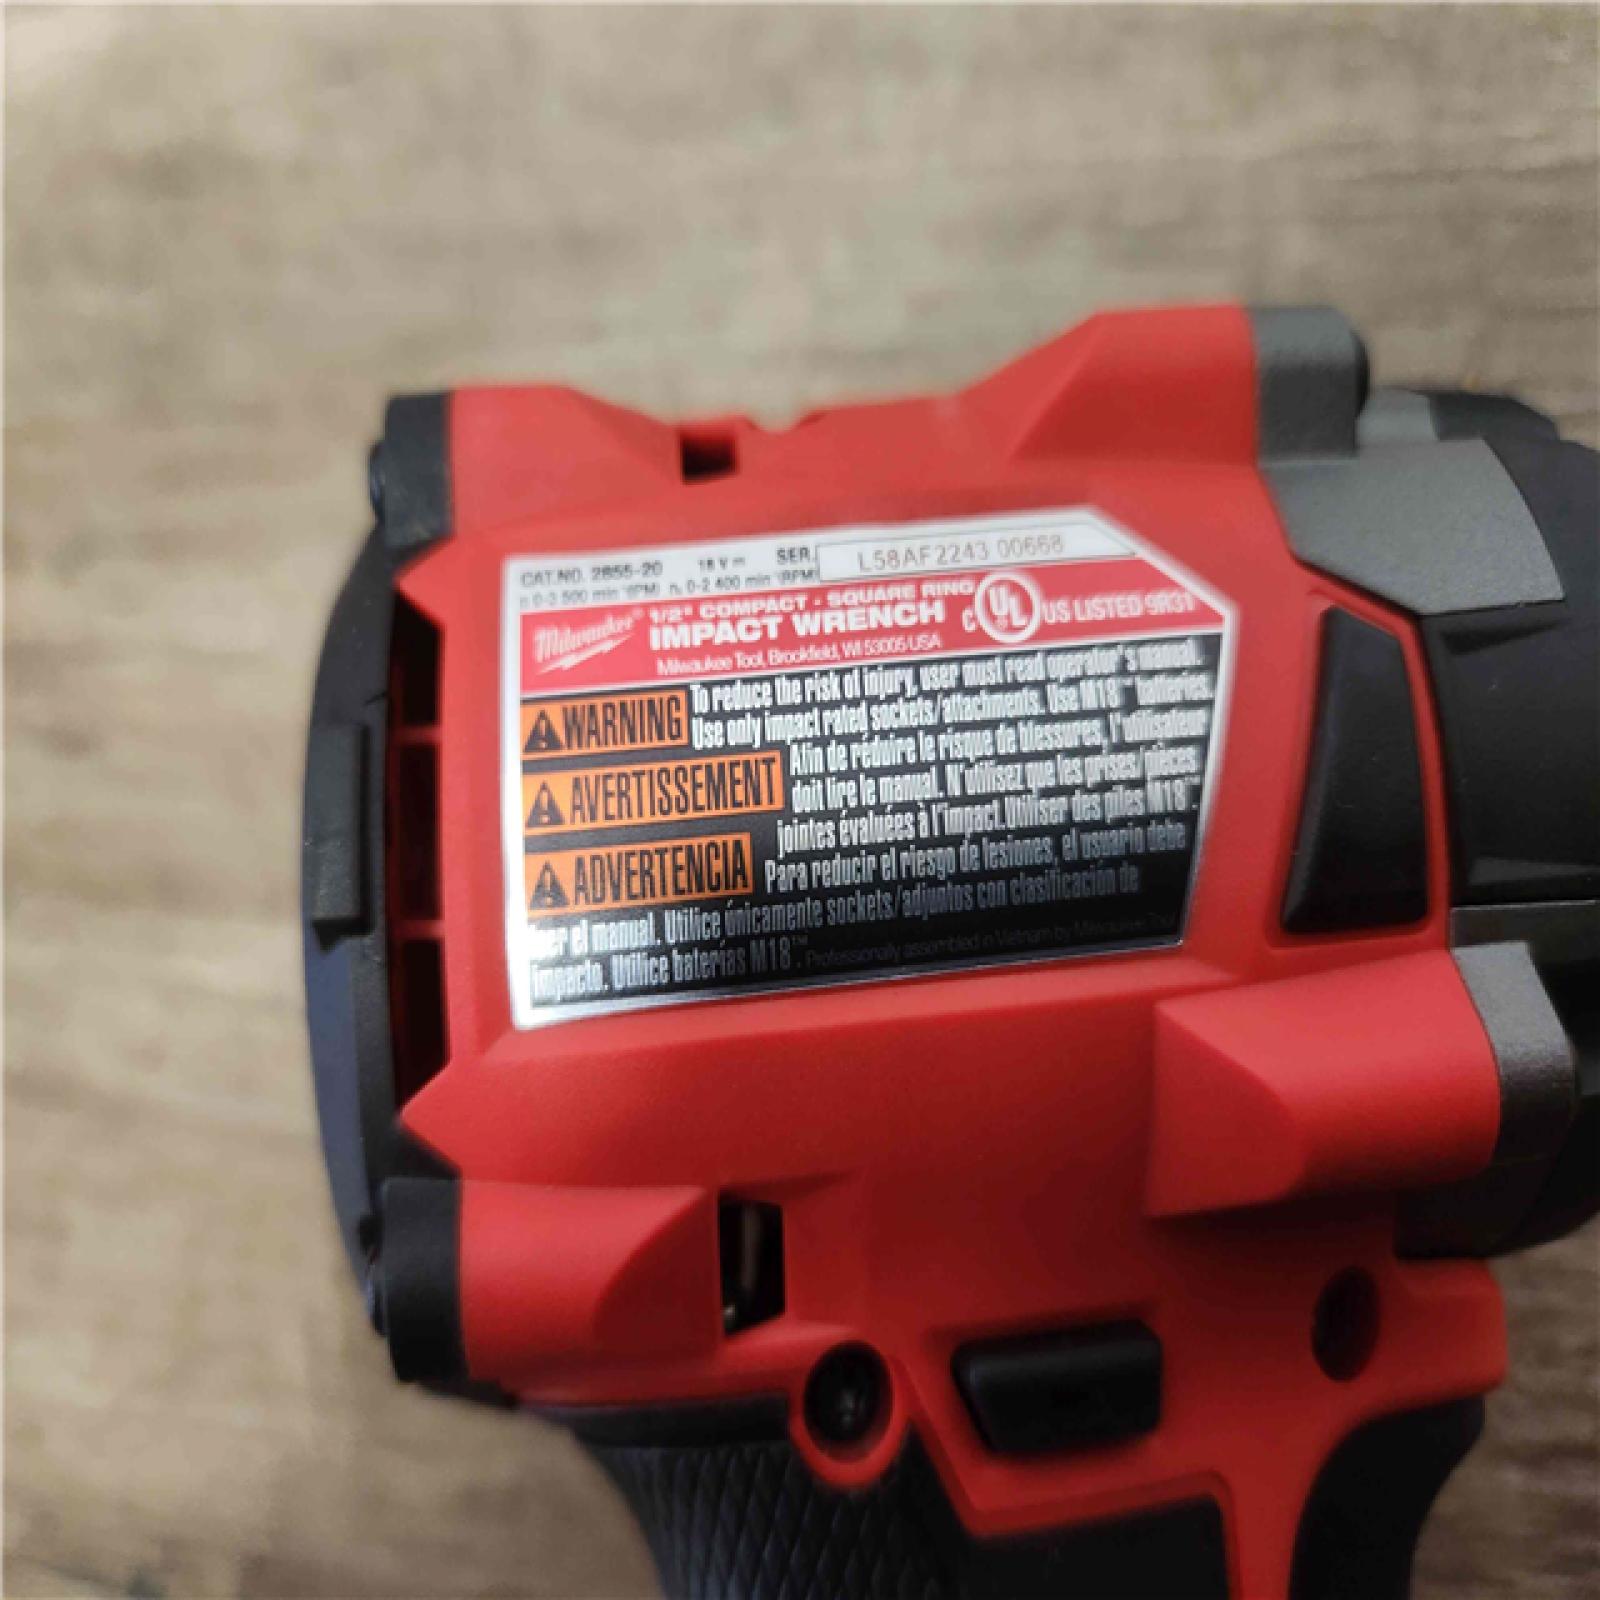 Phoenix Location NEW Milwaukee M18 FUEL 18V Lithium-Ion Brushless Cordless 1/2 in. Compact Impact Wrench with Friction Ring Kit, Resistant Batteries 2855-22R